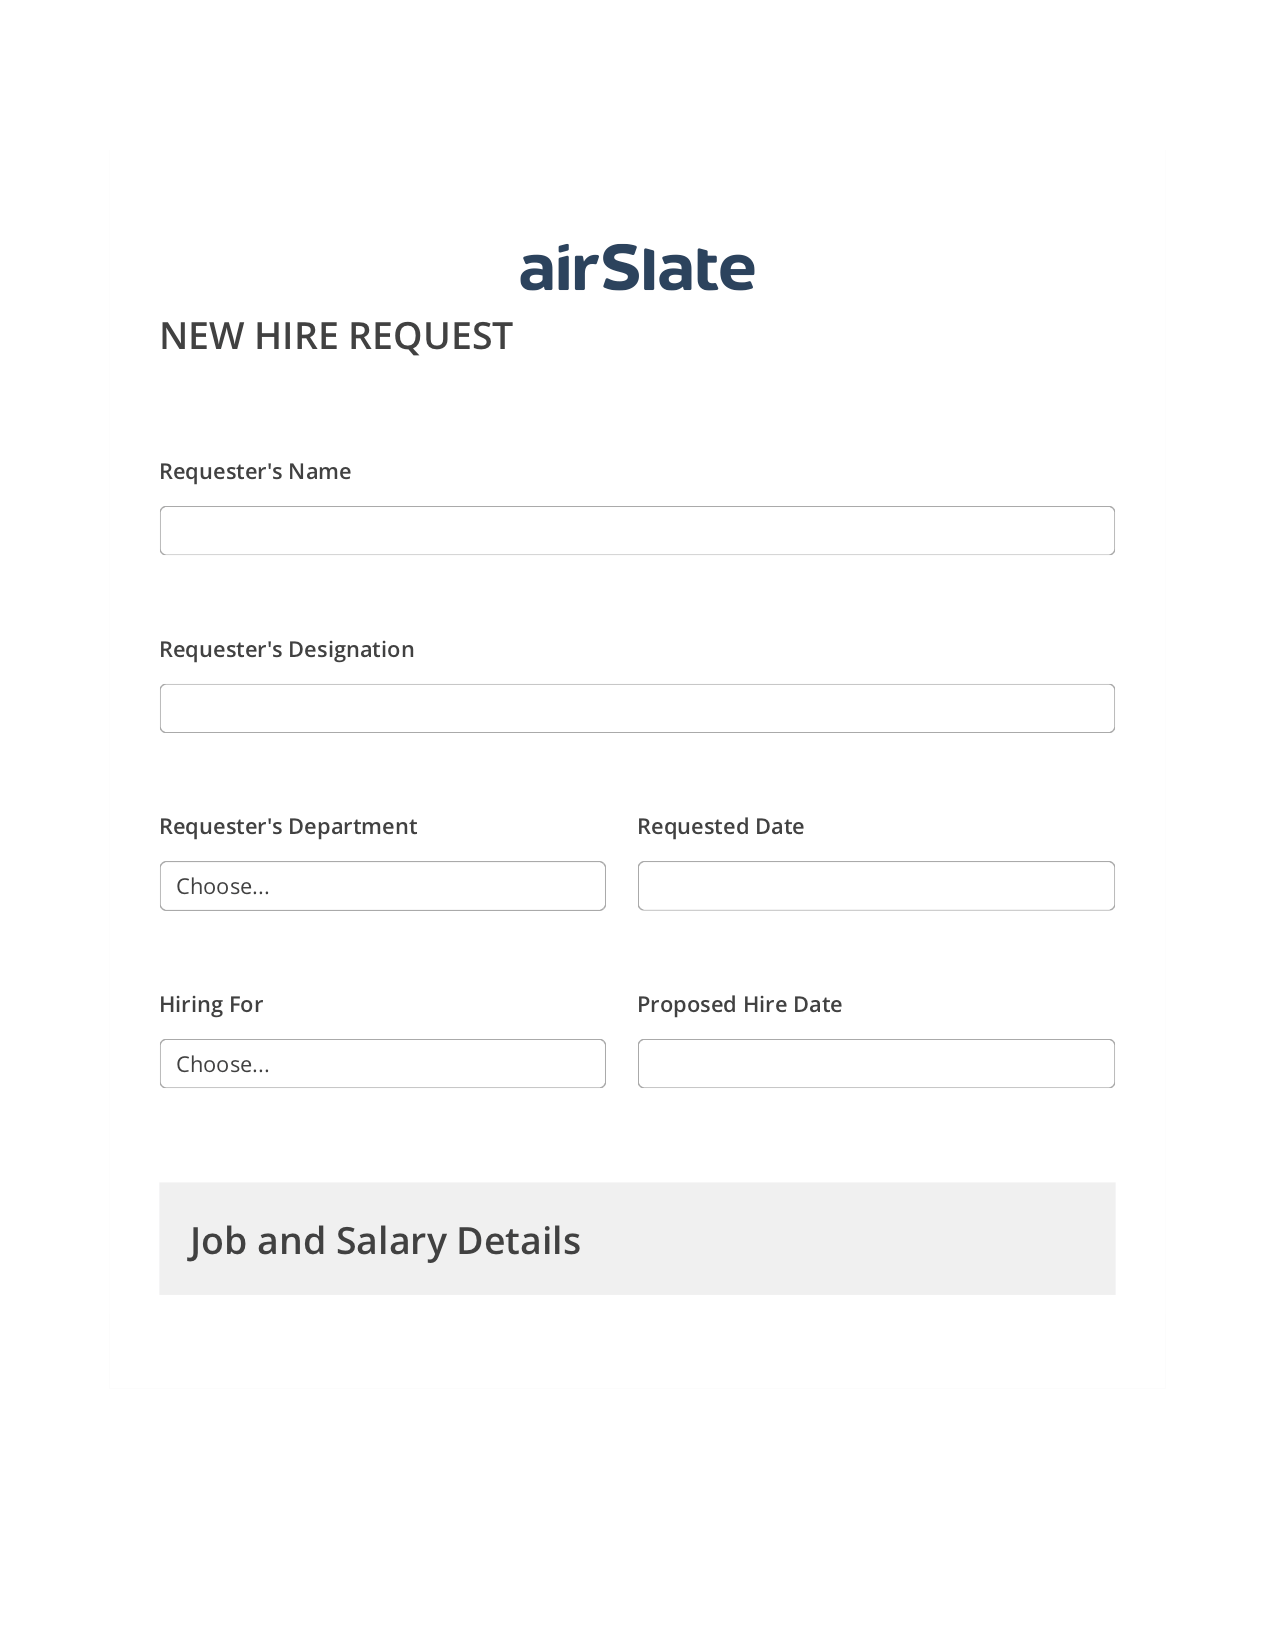 Hiring Request Workflow Pre-fill from AirTable Bot, Unassign Role Bot, Export to Excel 365 Bot